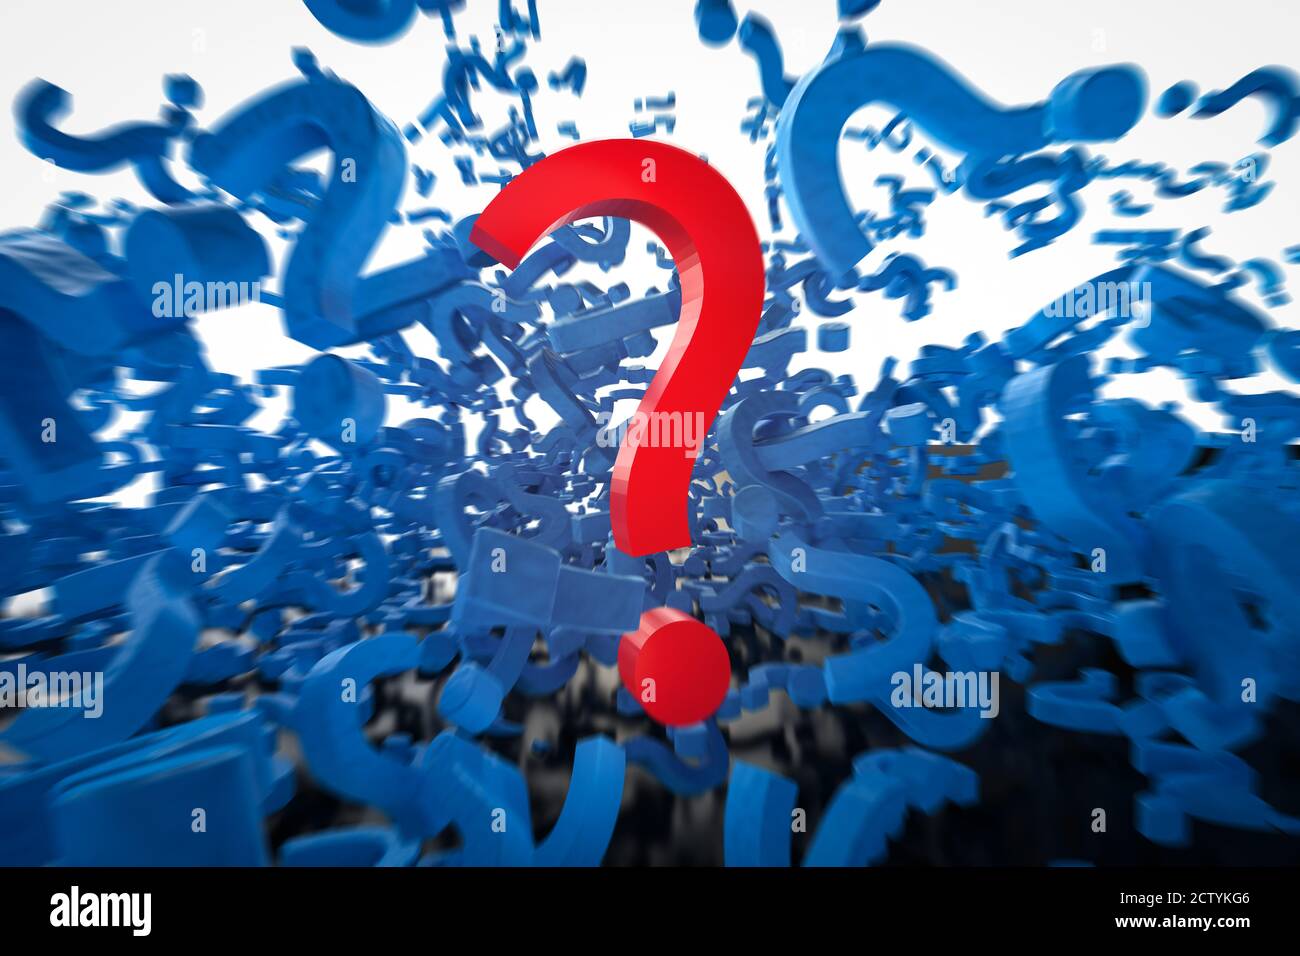 3d rendering blue question mark with red question mark Stock Photo